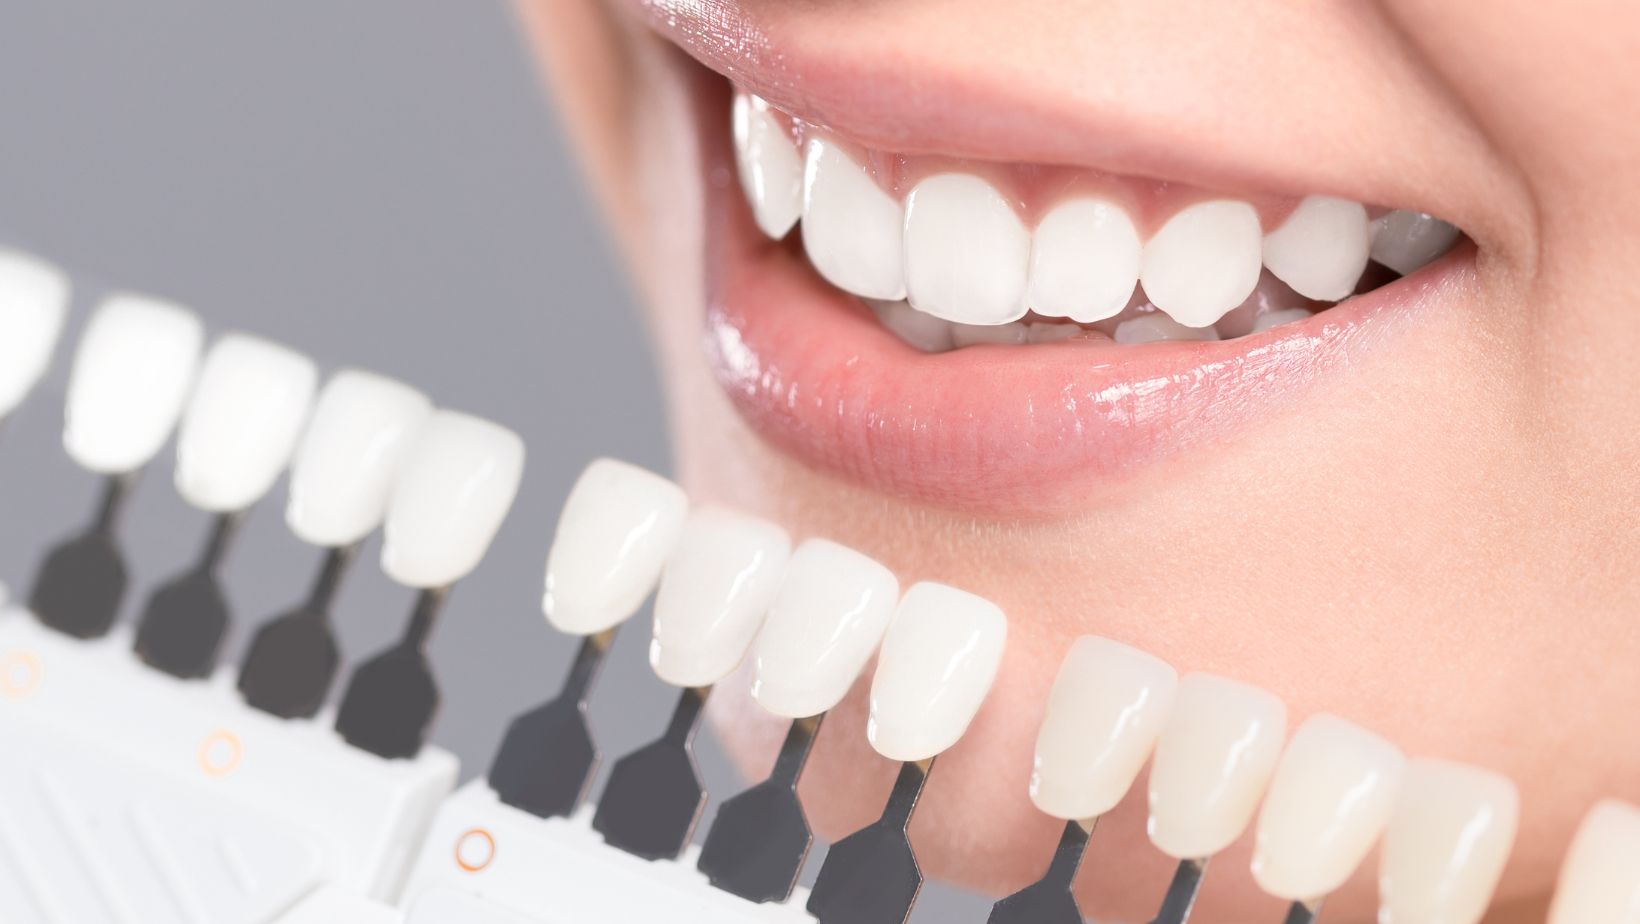 The Top 5 States Where Teeth Whitening is Most Popular